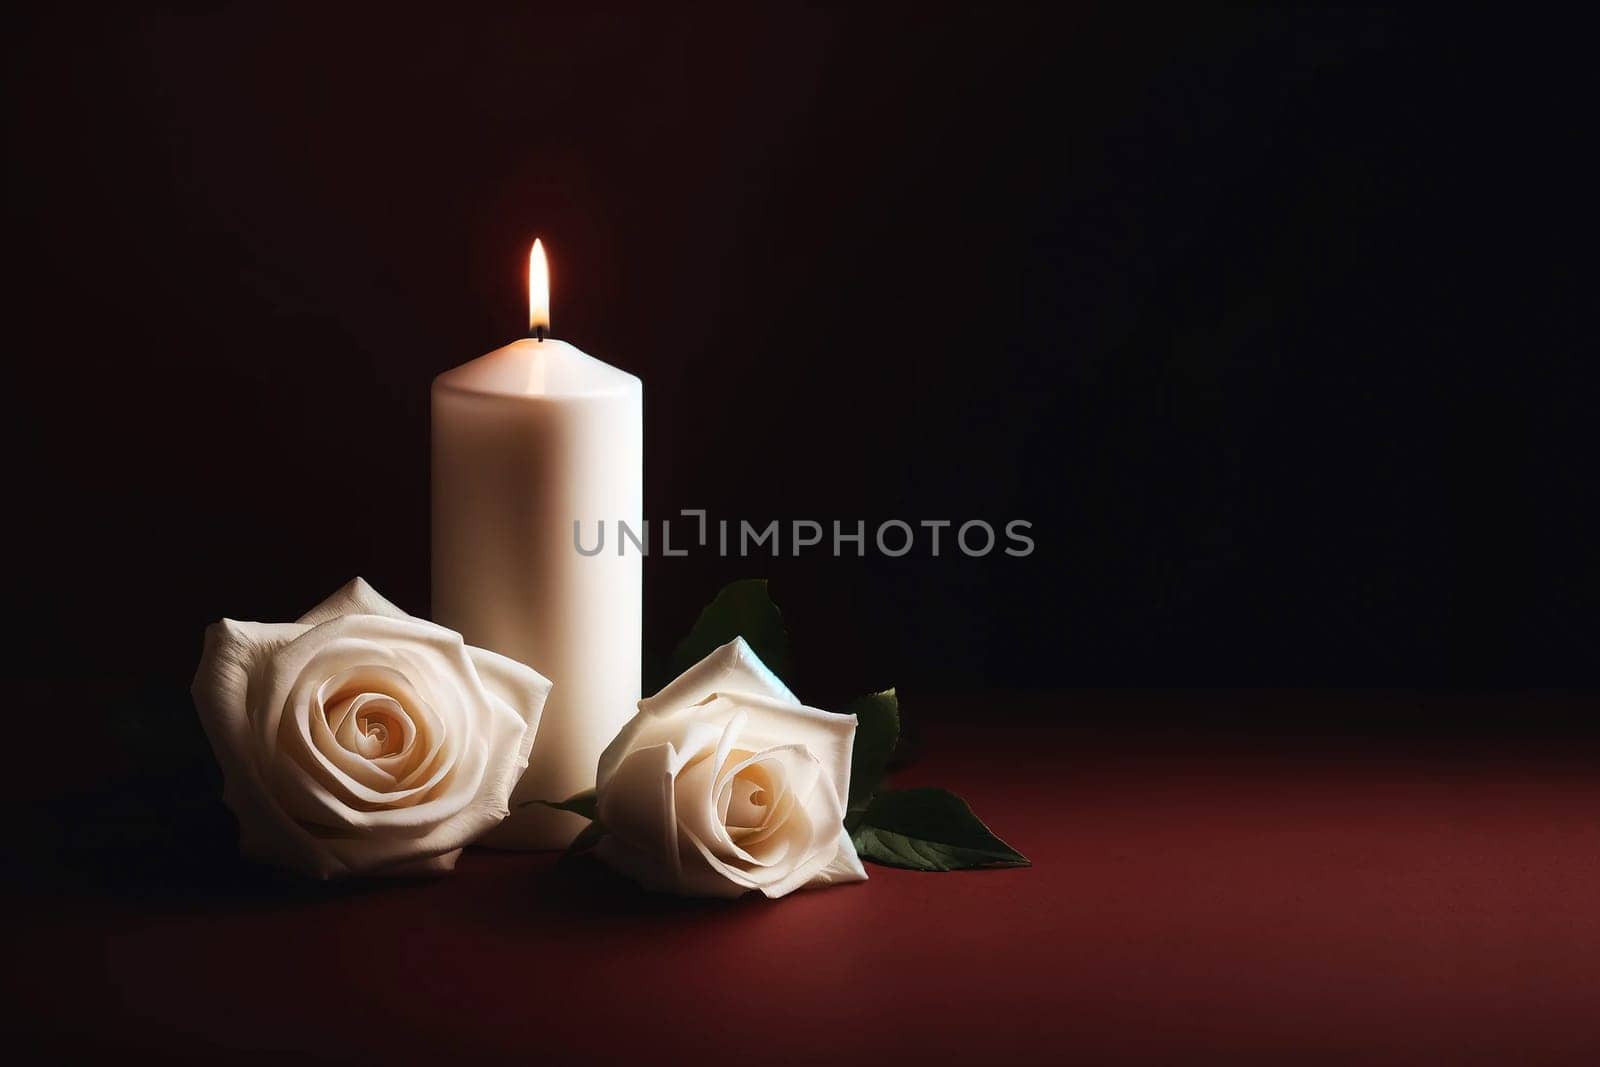 white candle and two white roses on a very dark burgundy background, a symbol of mourning and memory, copy space